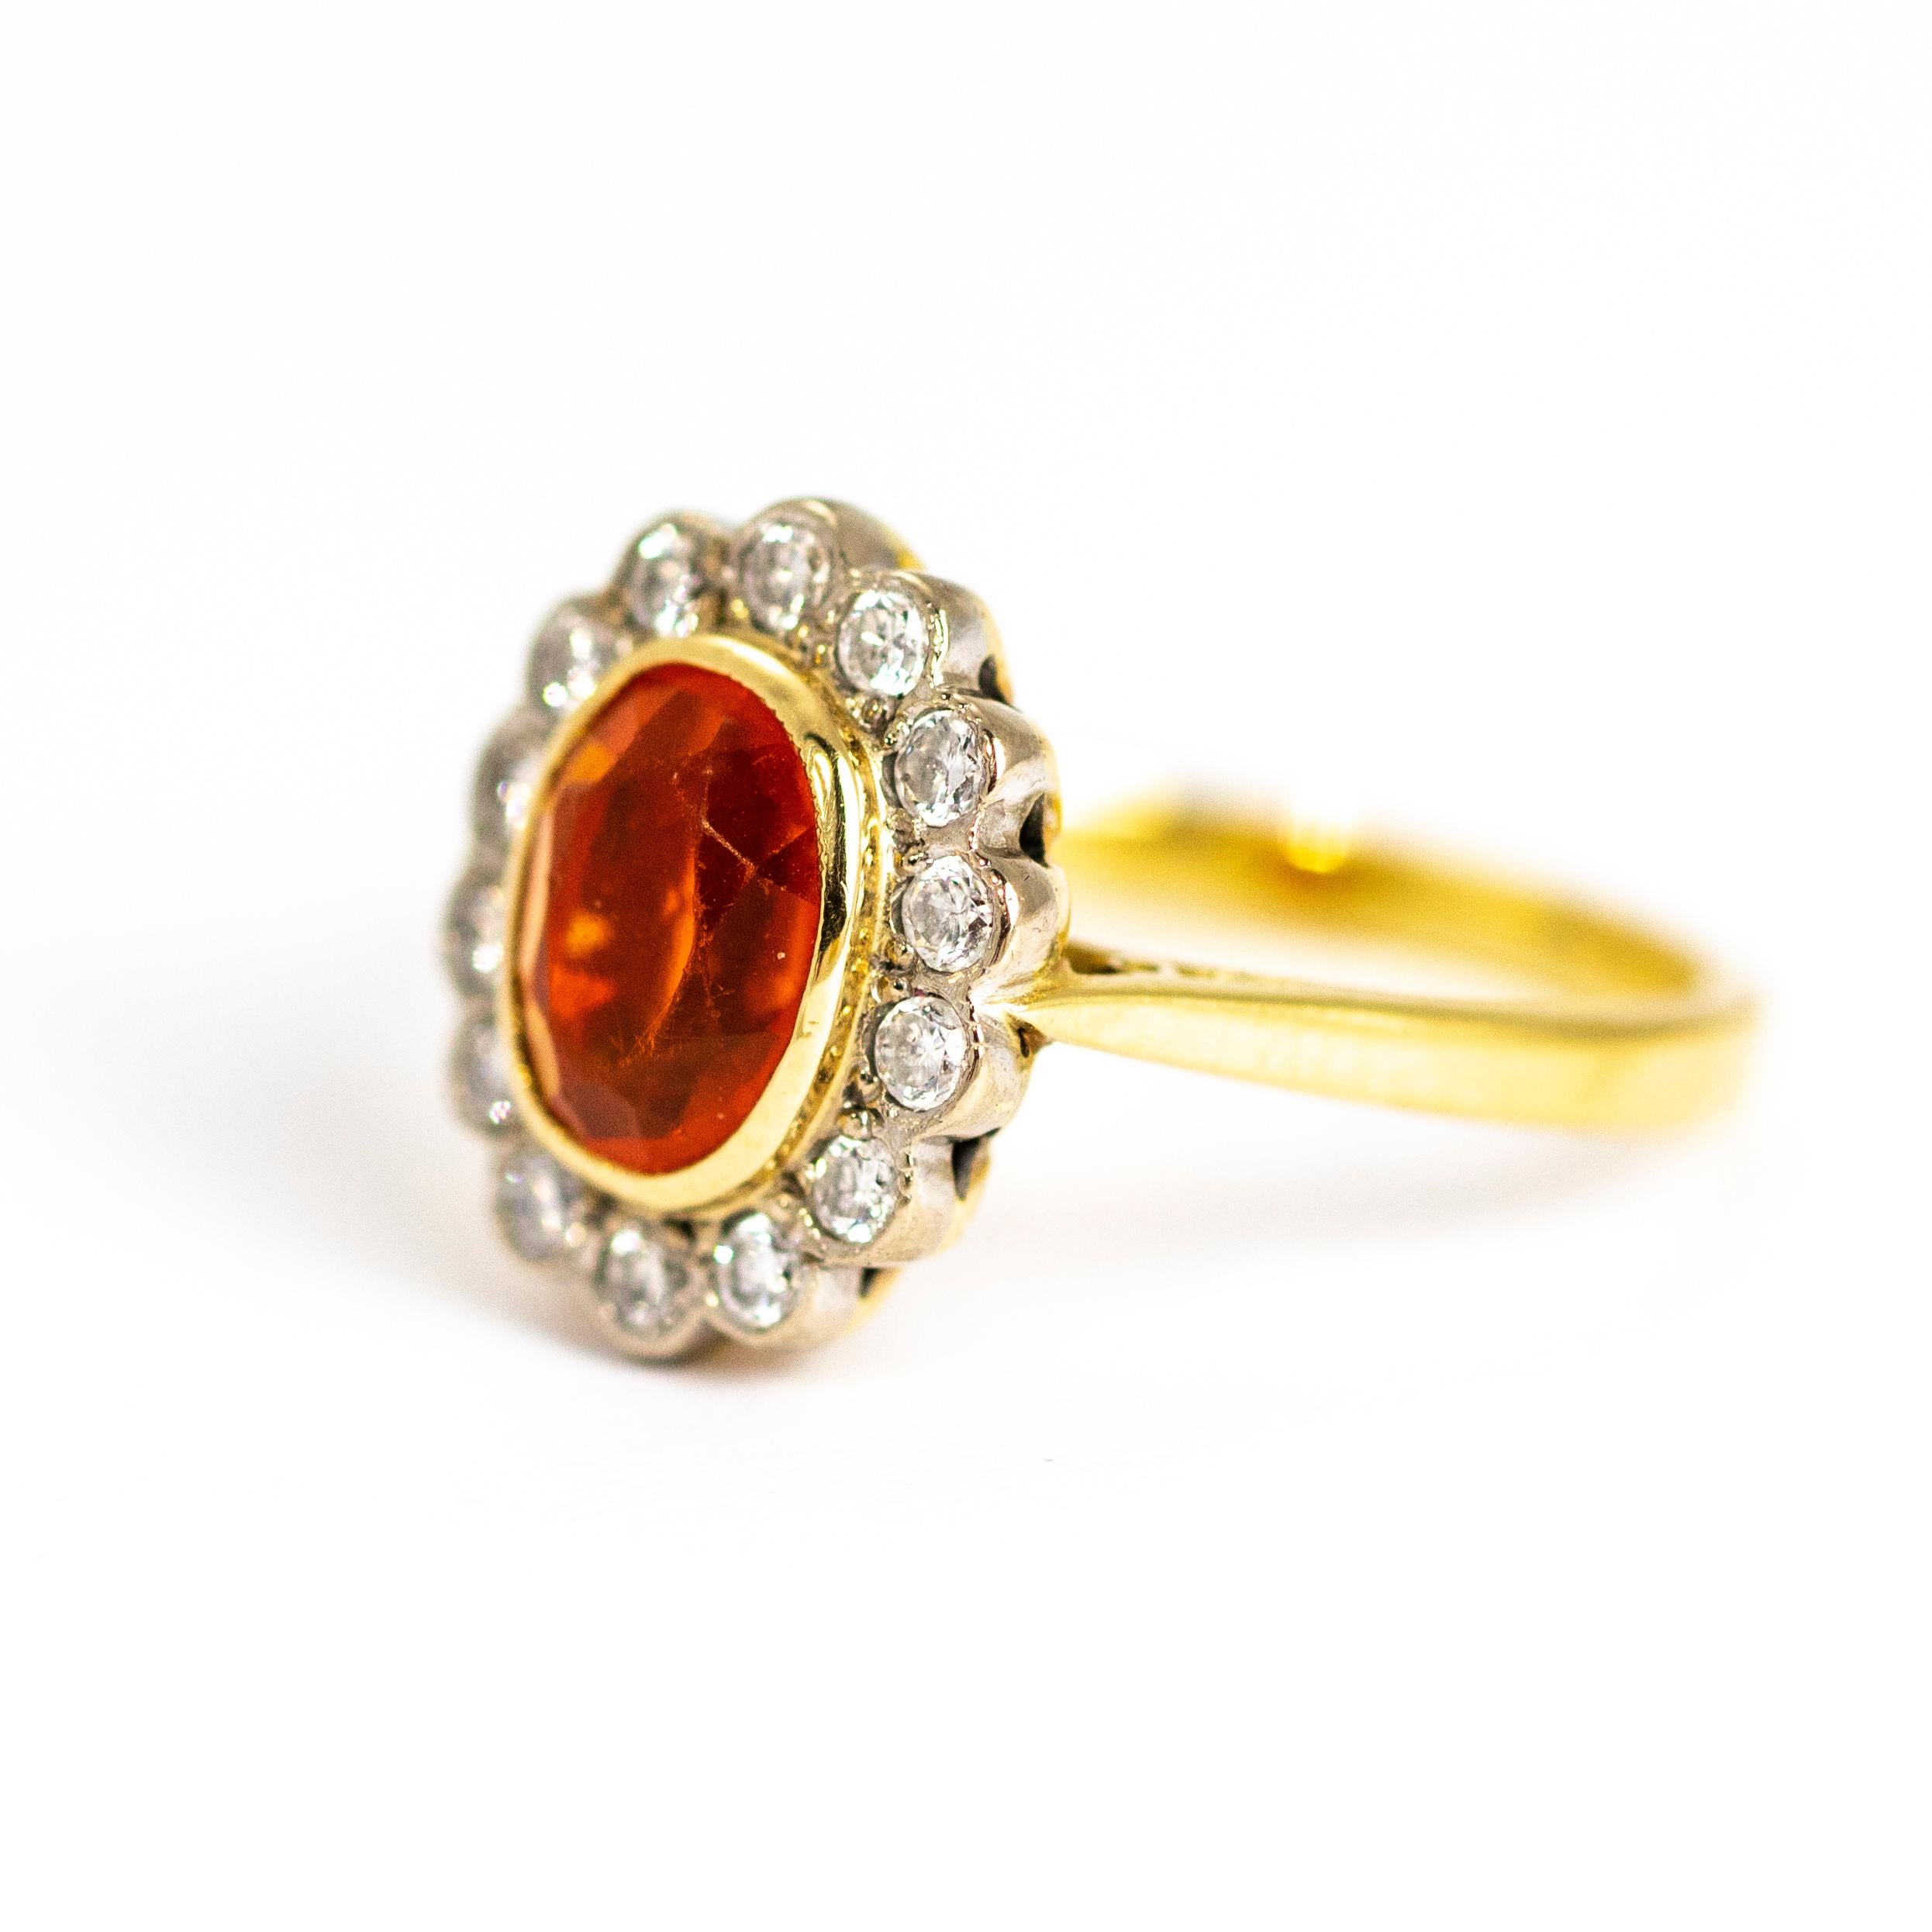 Fire opals are the most striking bright orange colour. This oval faceted stone is 7.3mm long and surrounded by beautiful and sparkling round brilliant cut diamonds all set in a charming cluster and sat upon a very simple gold band. It is believed